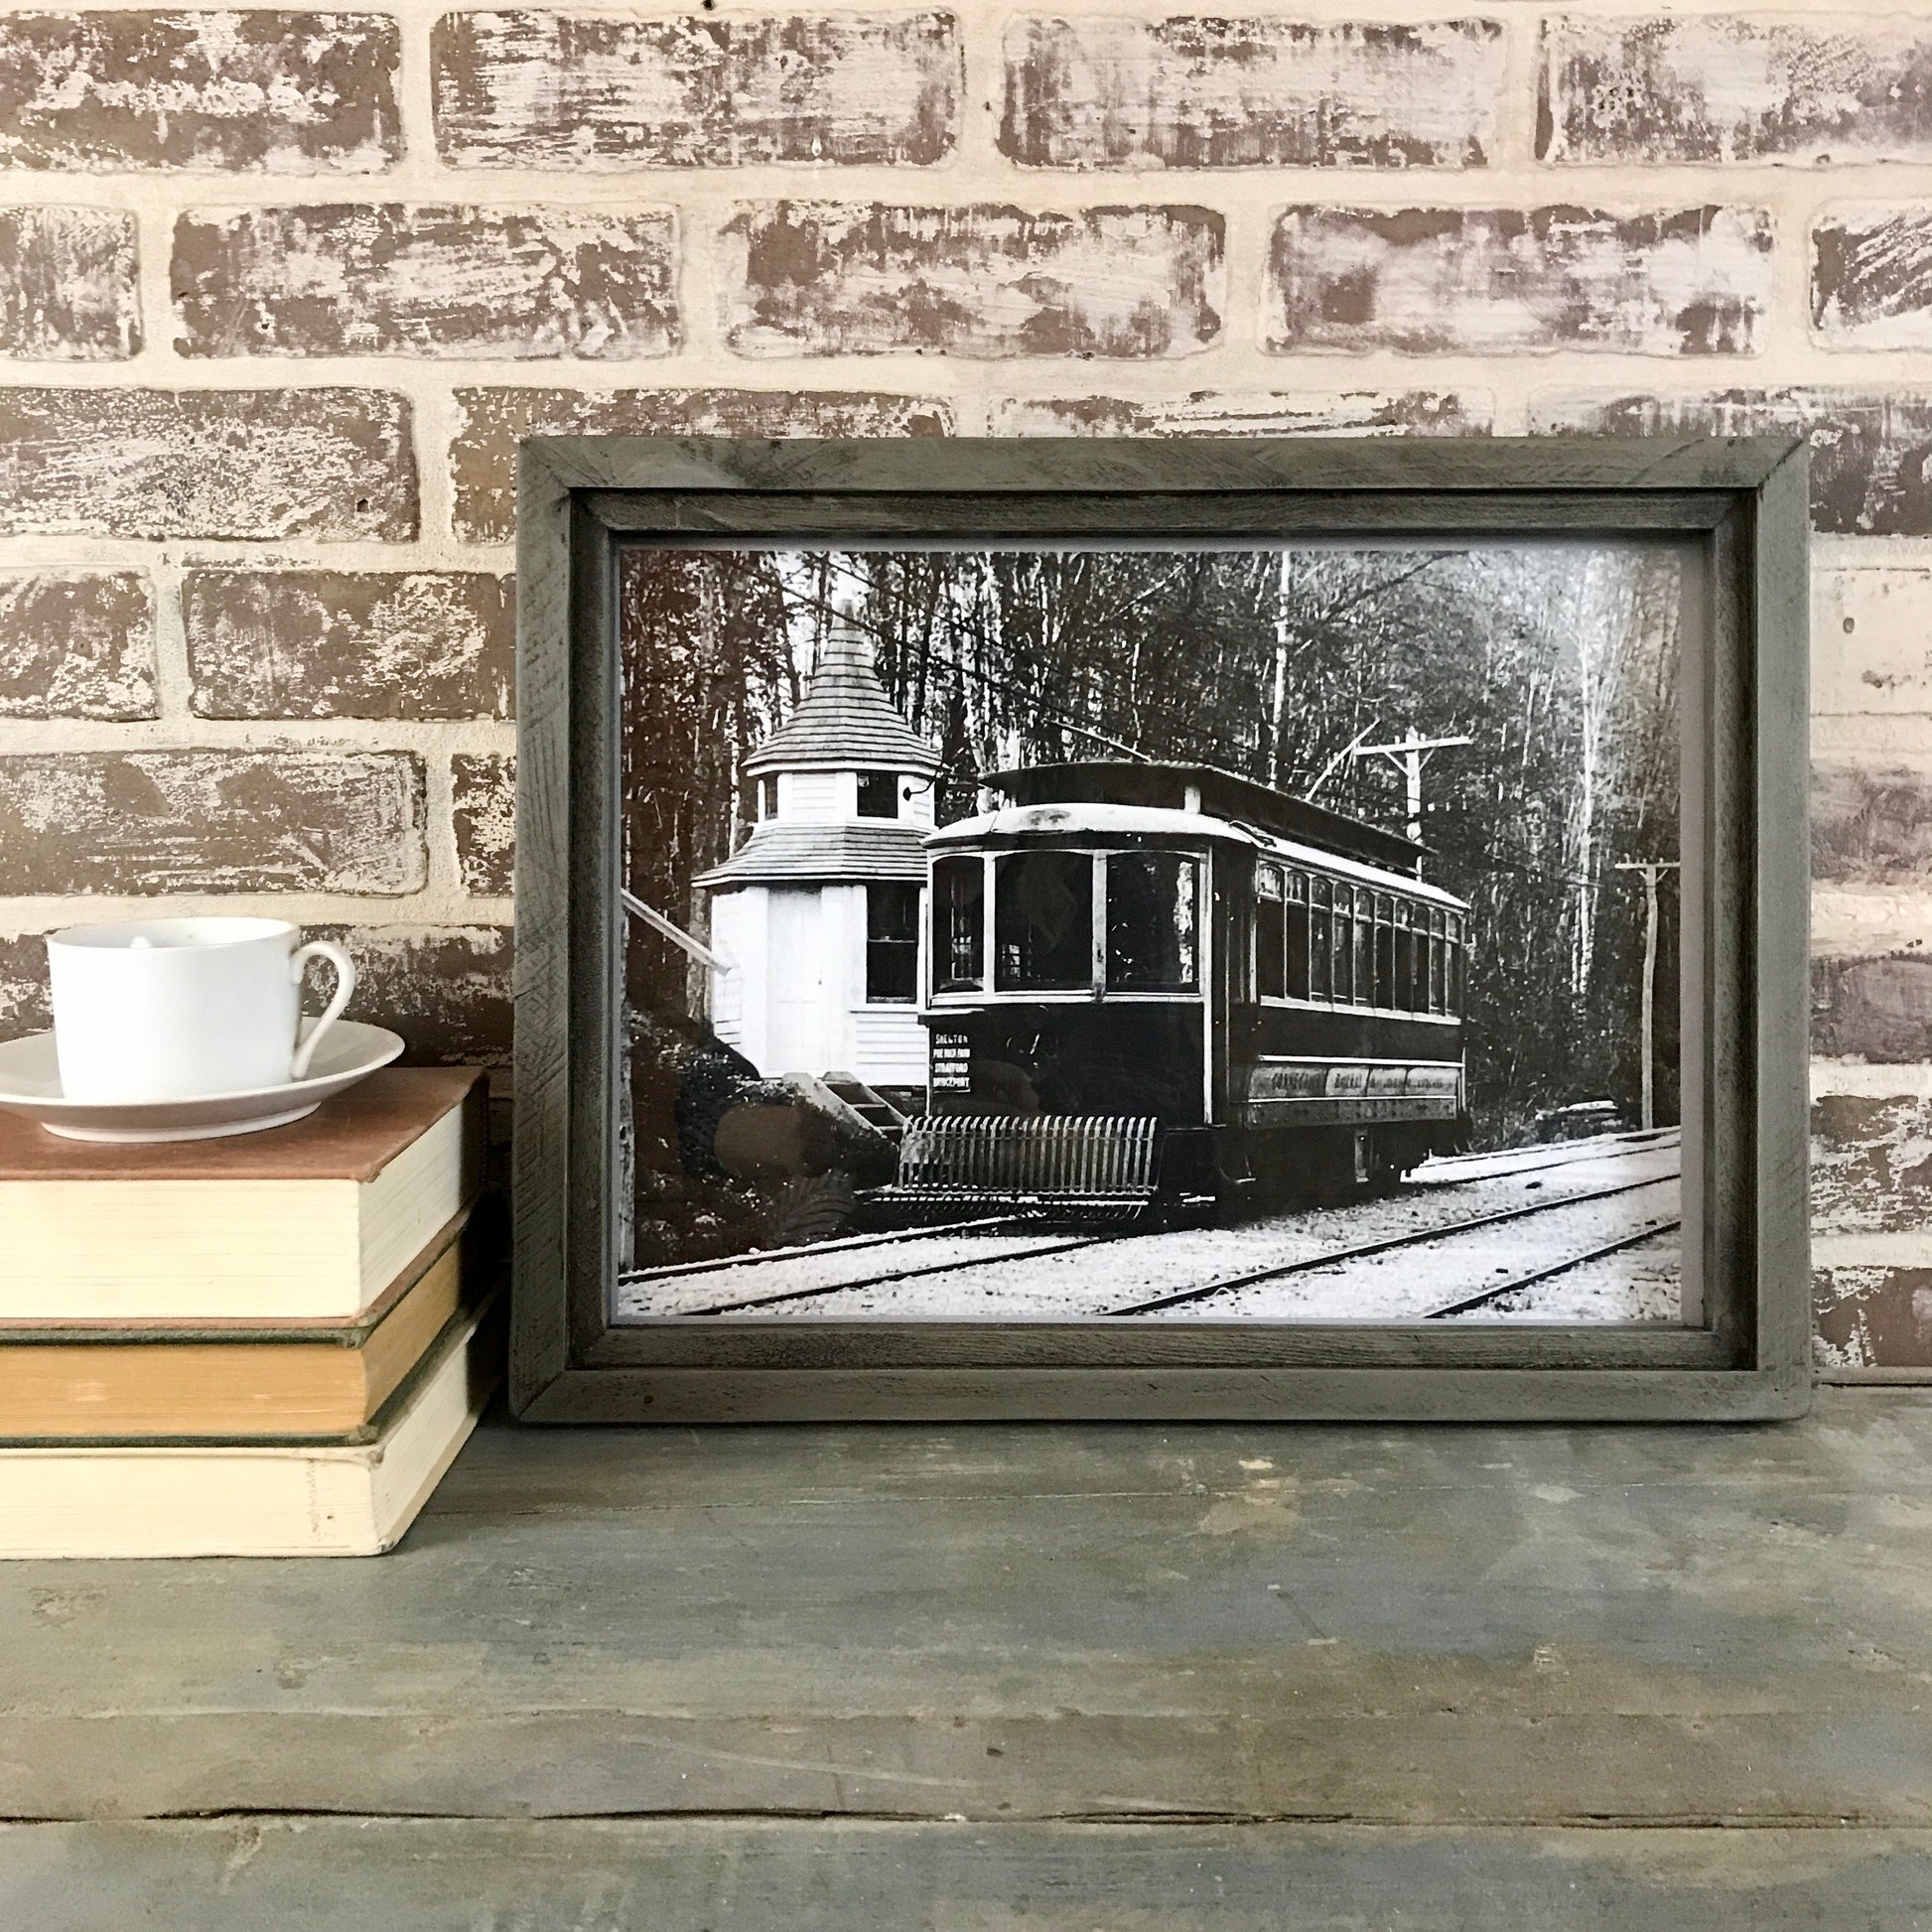 Vintage Shelton Connecticut Trolley Photo in Reclaimed Wood Frame - Grey - 18-in - Mellow Monkey